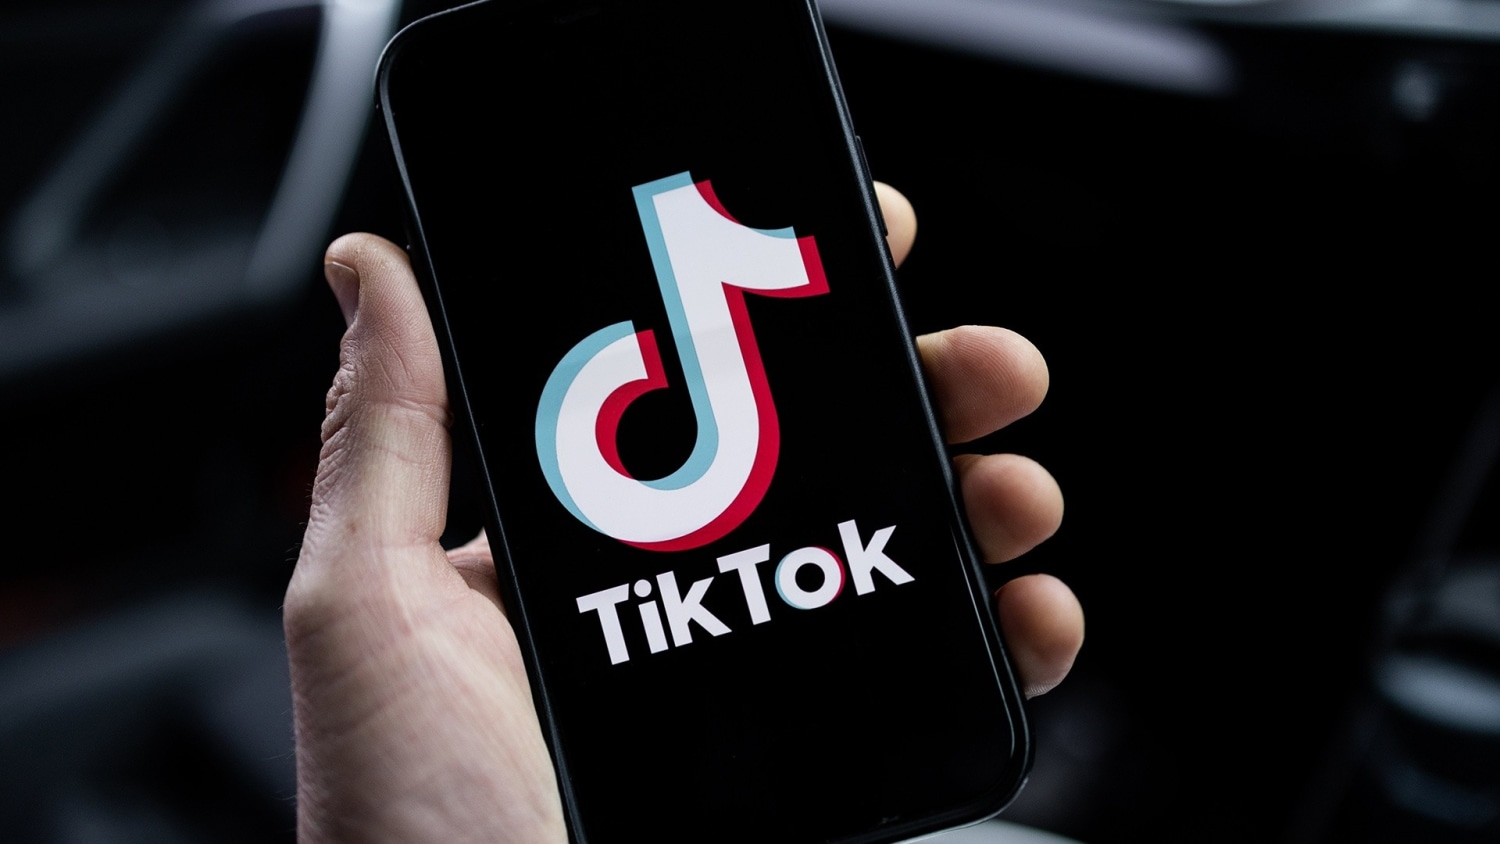 Why are governments cracking down on TikTok?